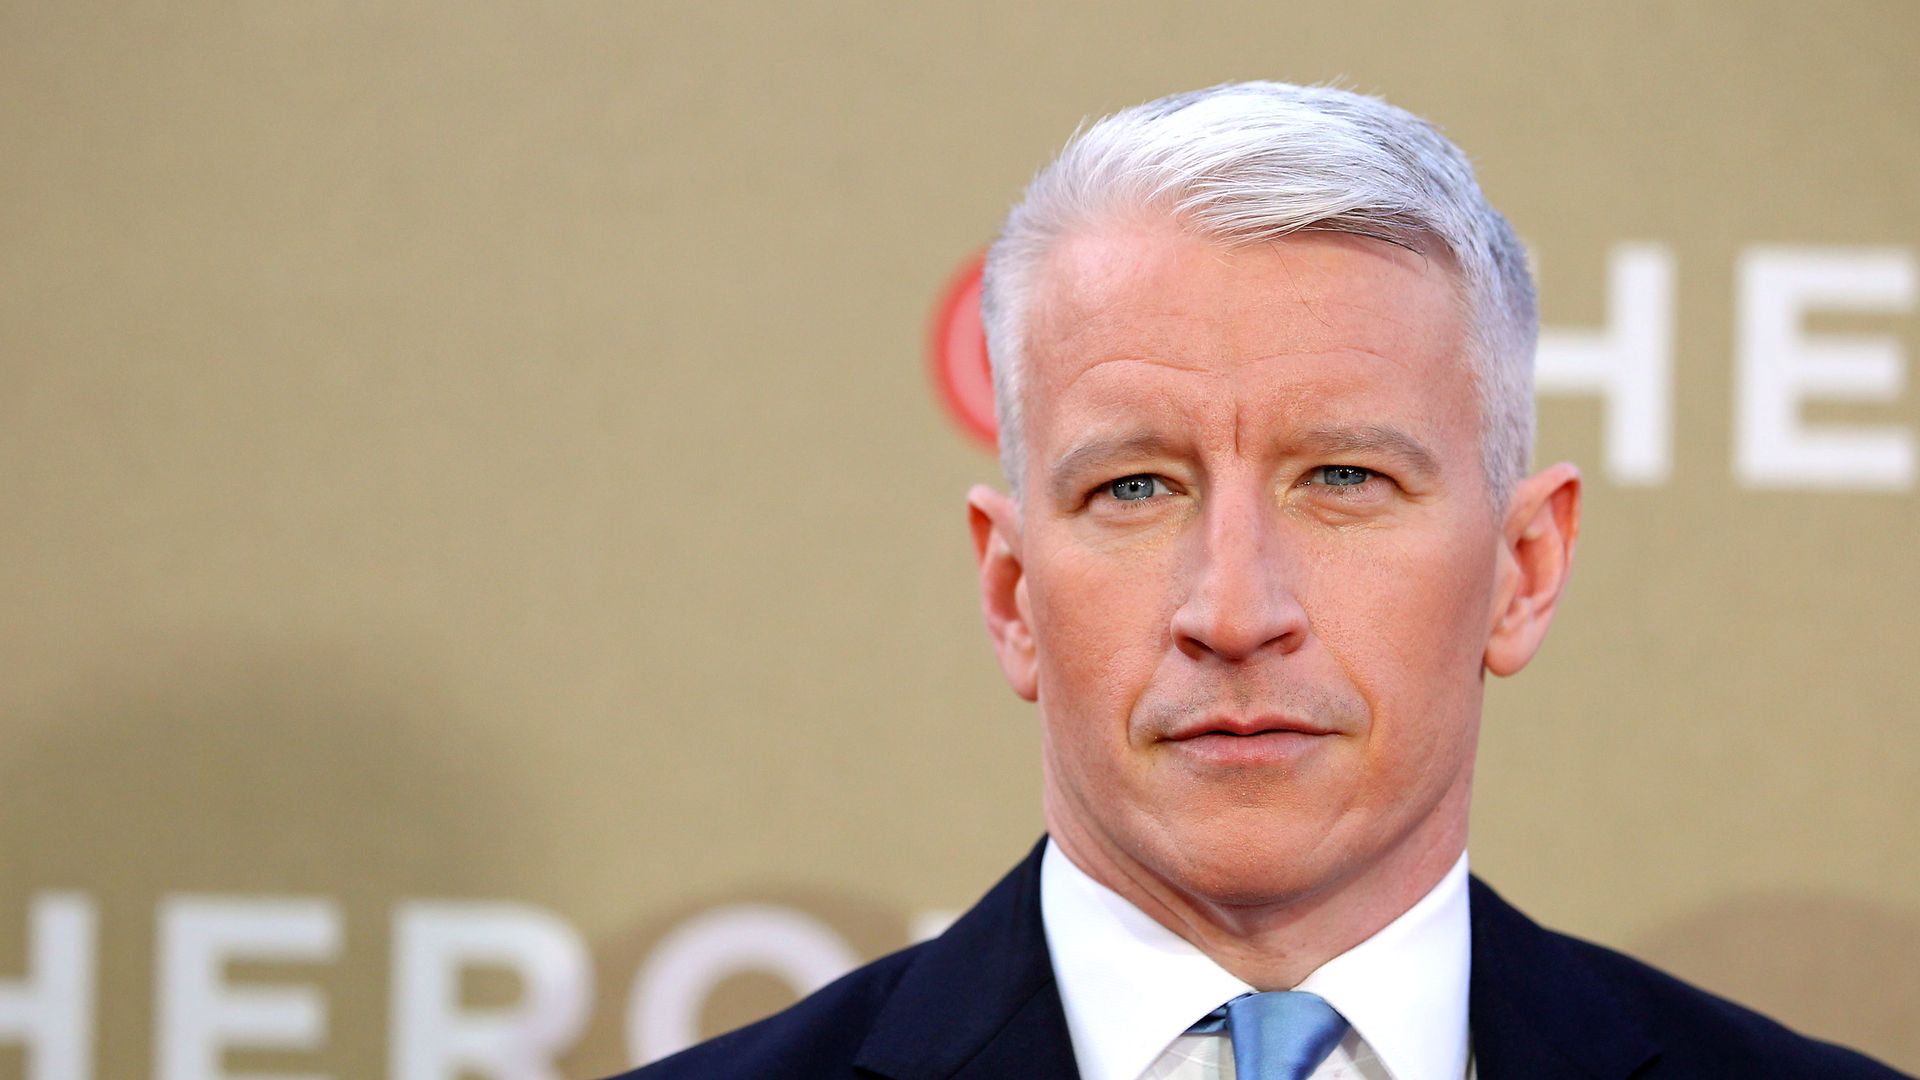 Anderson Cooper arrives at the 2011 CNN Heroes: An All-Star Tribute held at The Shrine Auditorium on December 11, 2011 in Los Angeles, California